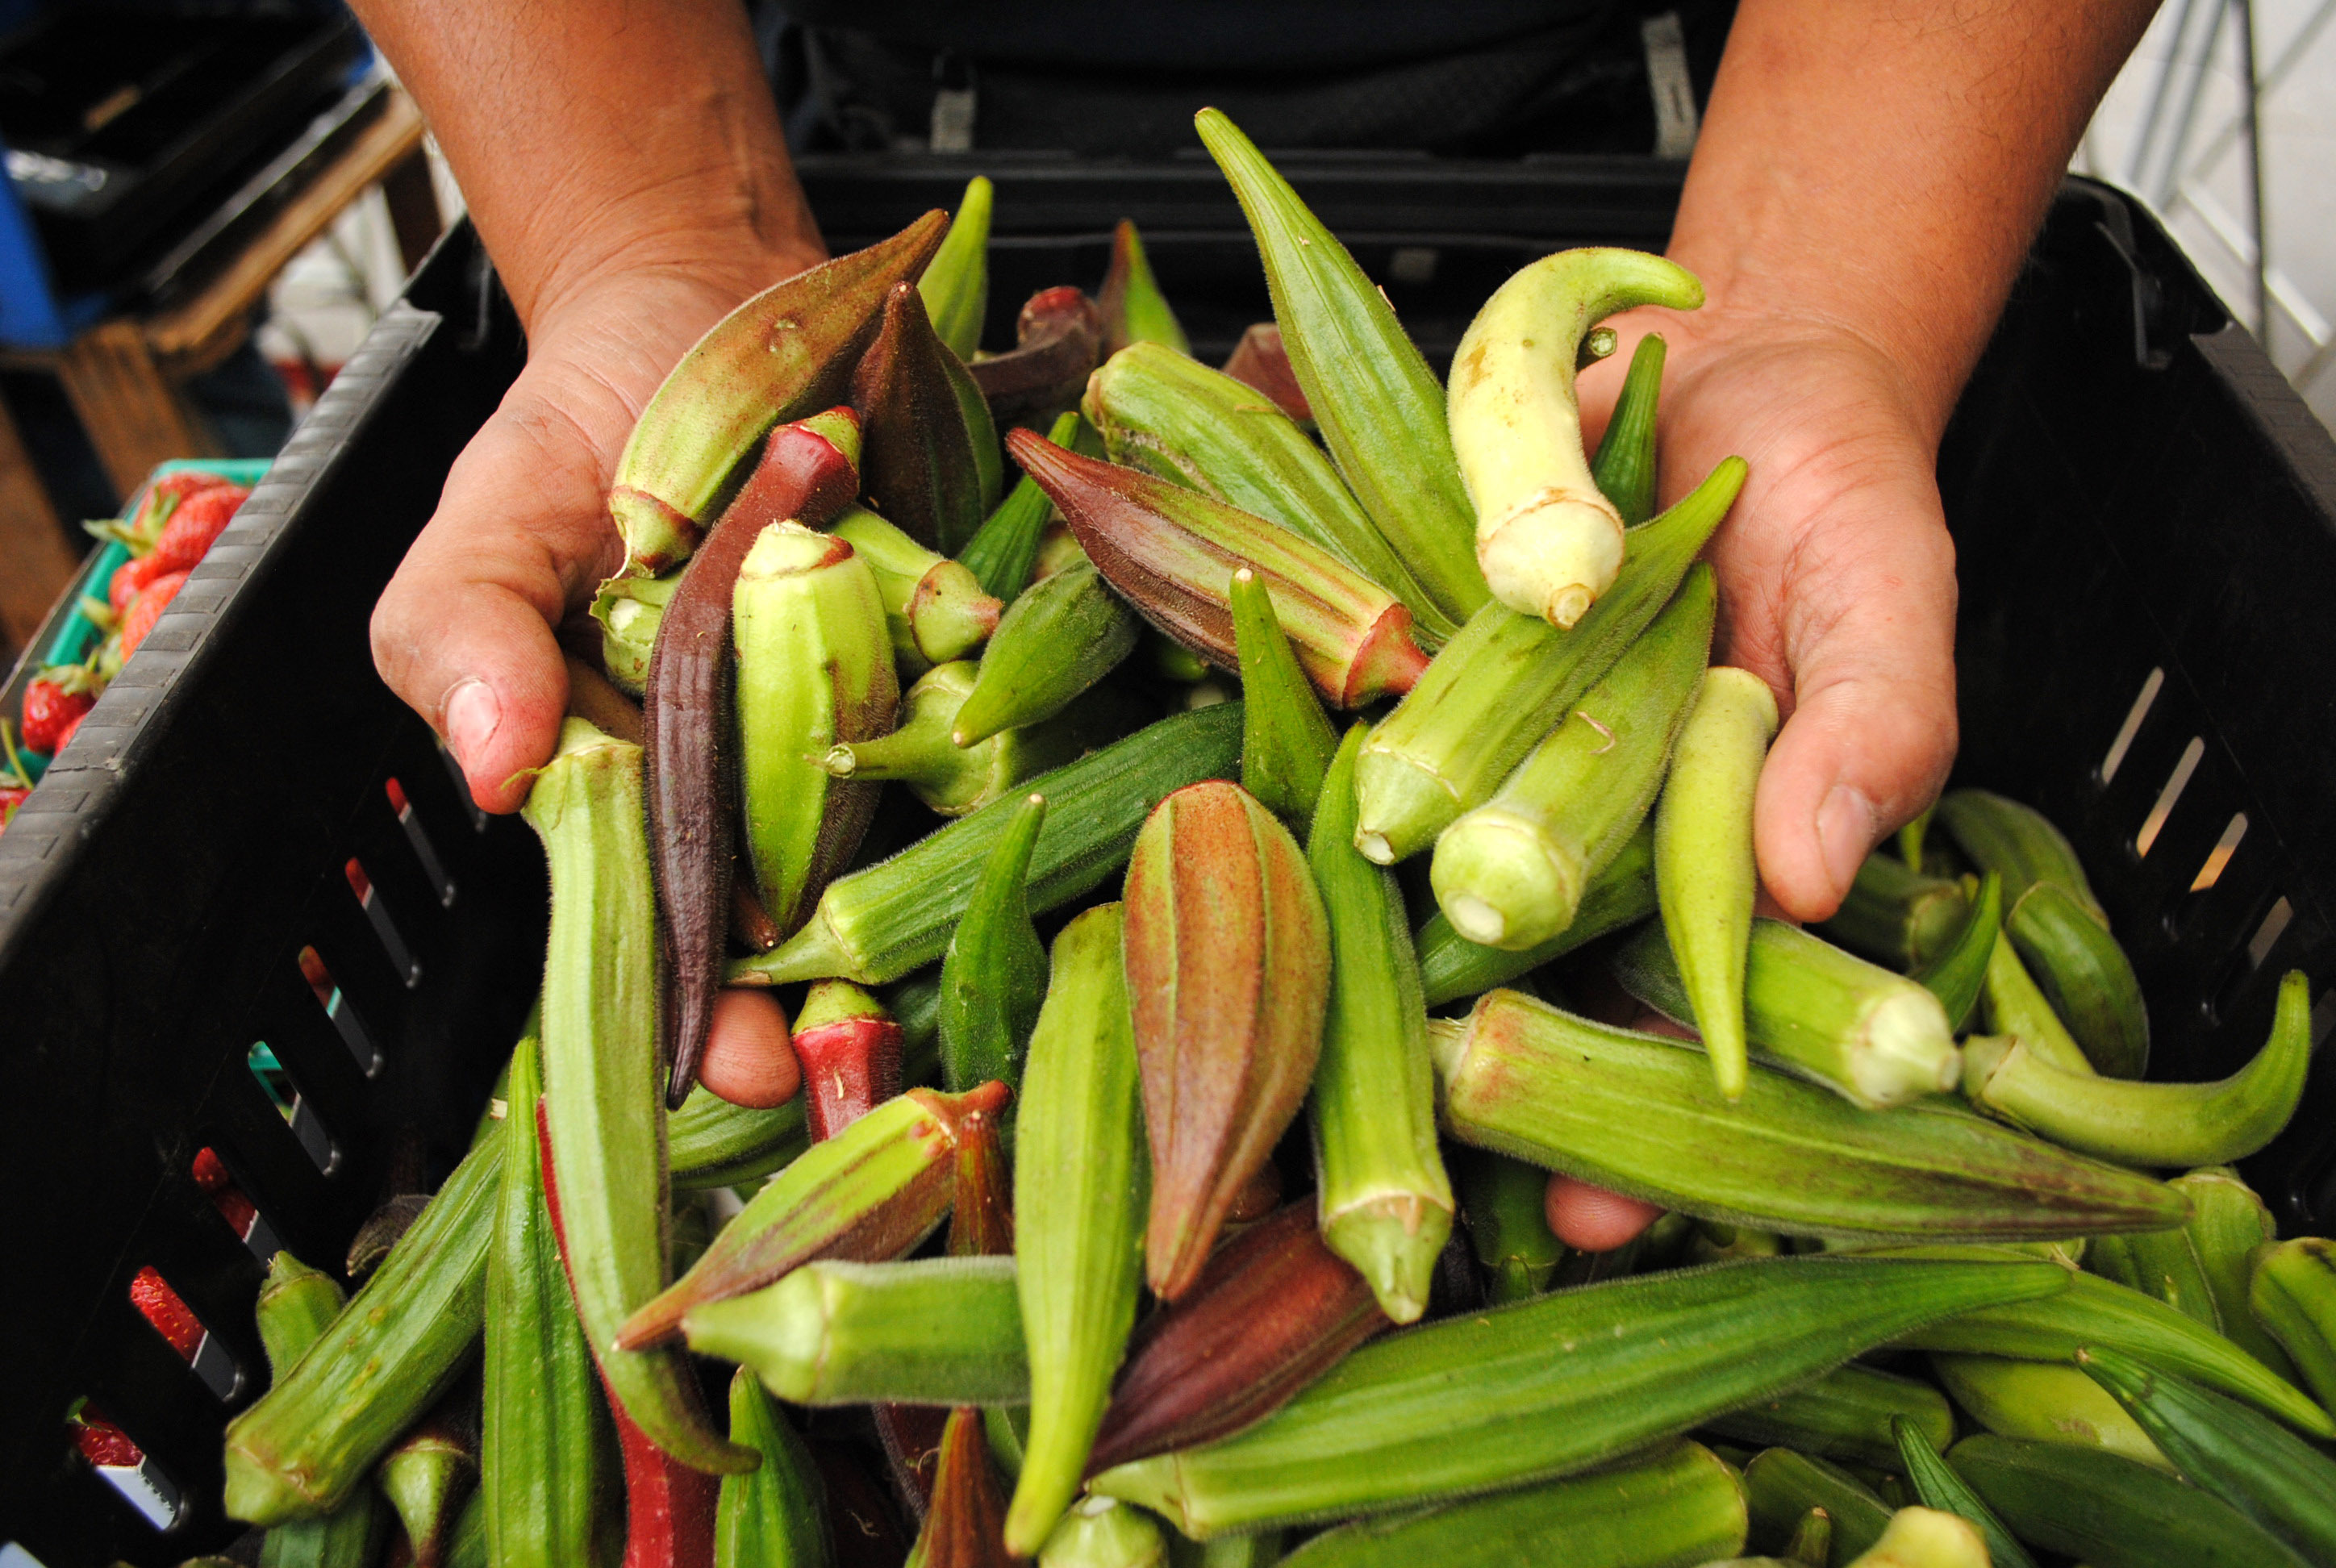 A crate of okra with two hands holding up the vegetables.